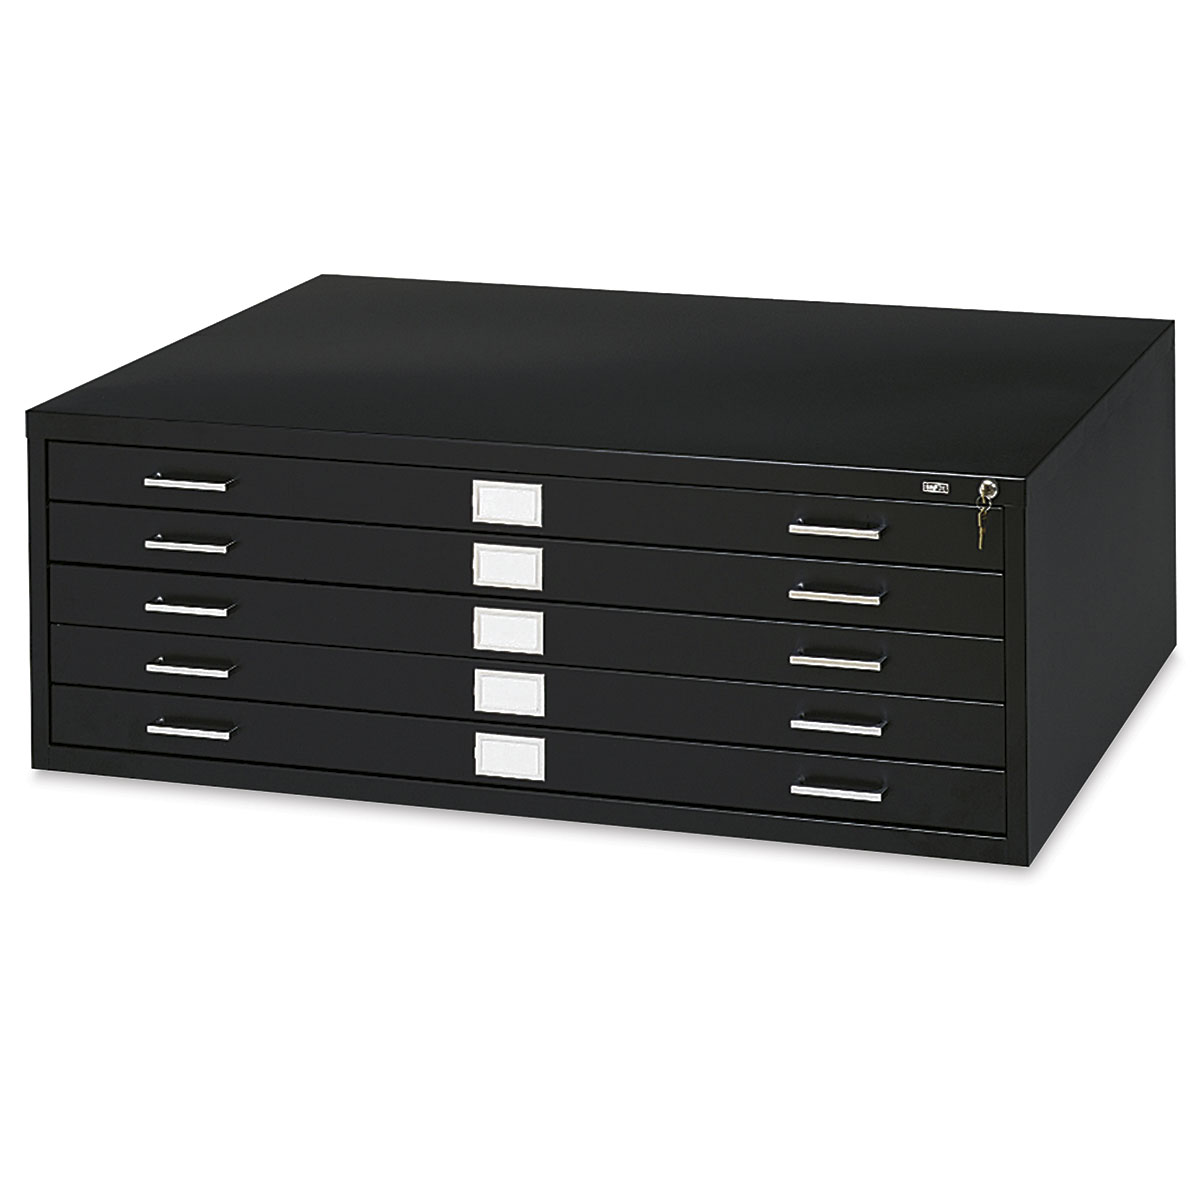 sold separately Safco Products Flat File Closed Base for 5-Drawer 4994GRR Flat File Gray 